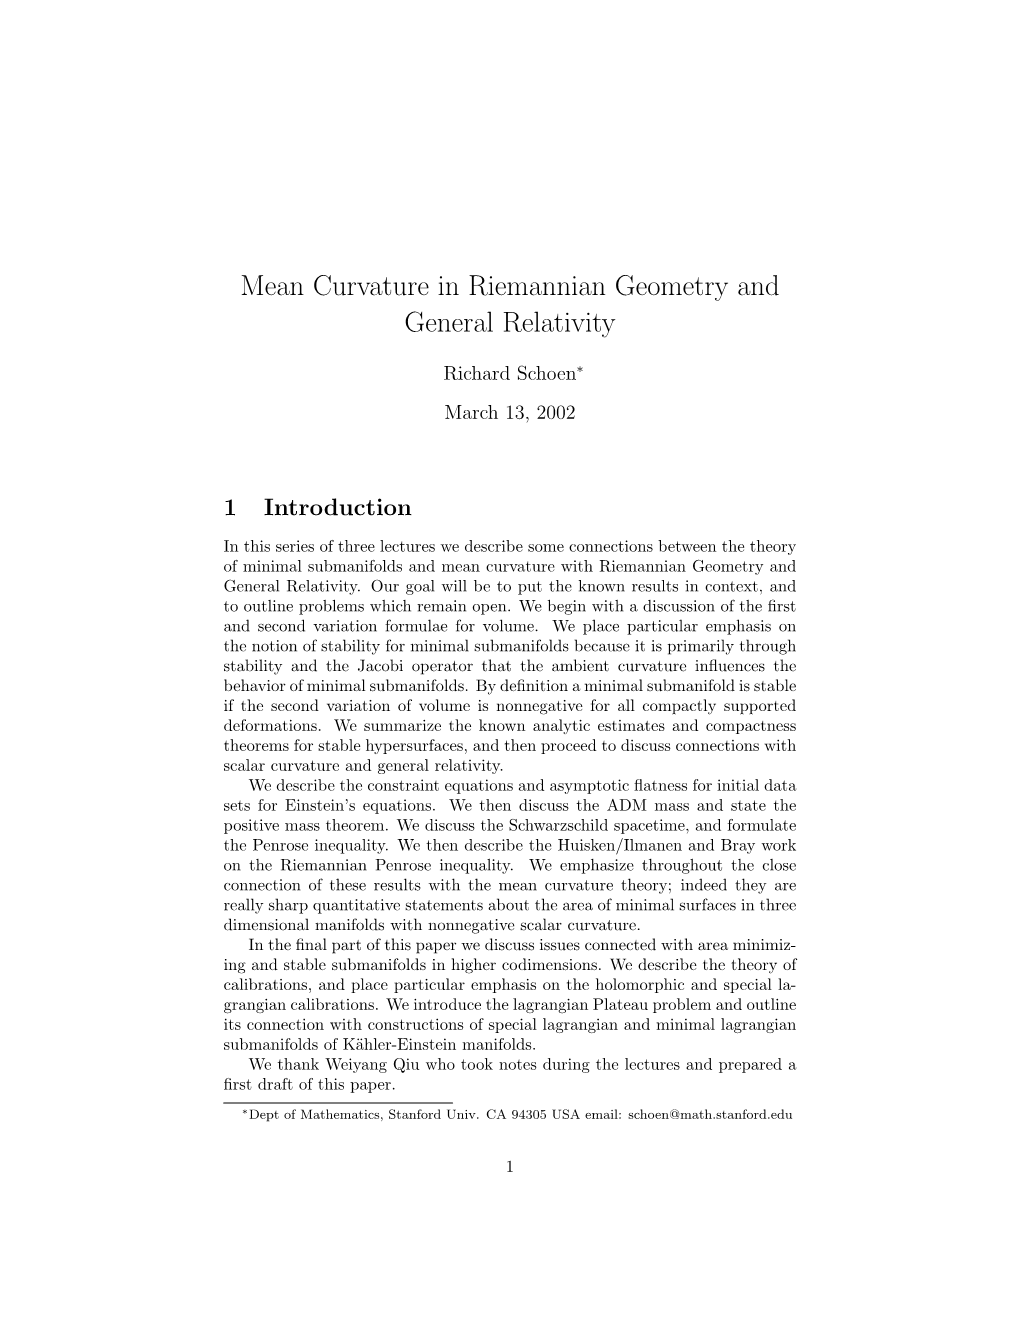 Mean Curvature in Riemannian Geometry and General Relativity